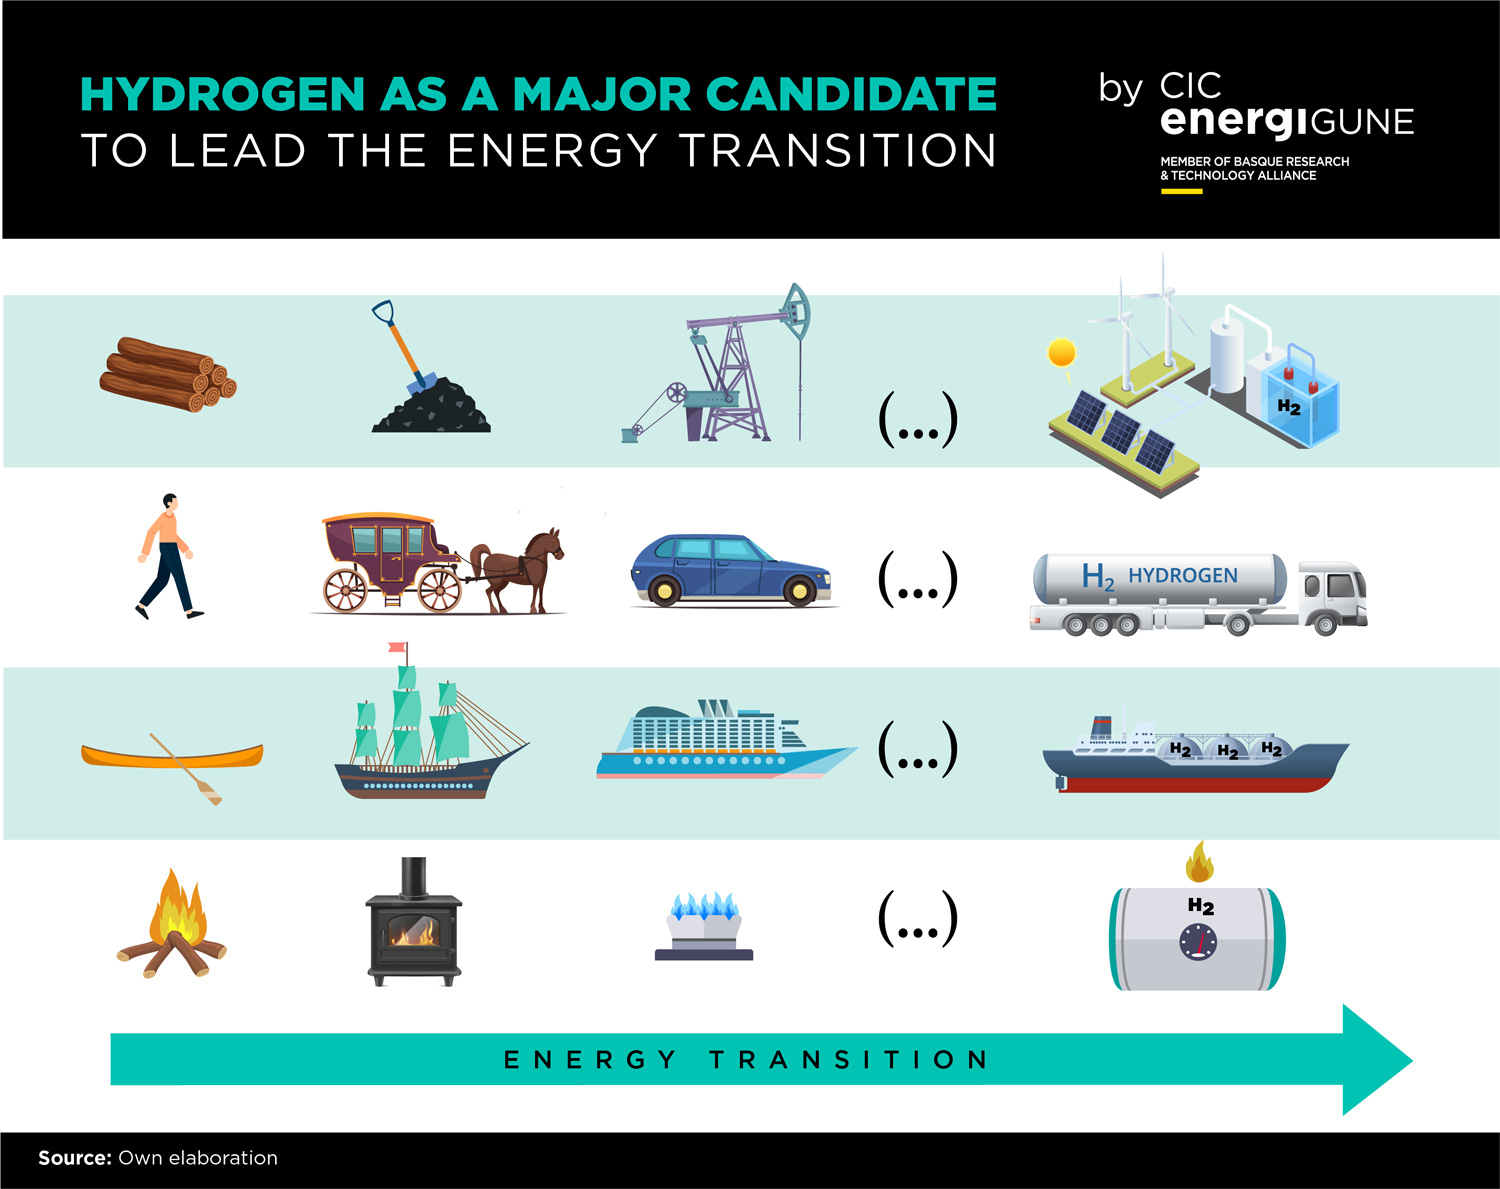 Graph justifying the role of hydrogen as the leading candidate to spearhead the energy transition